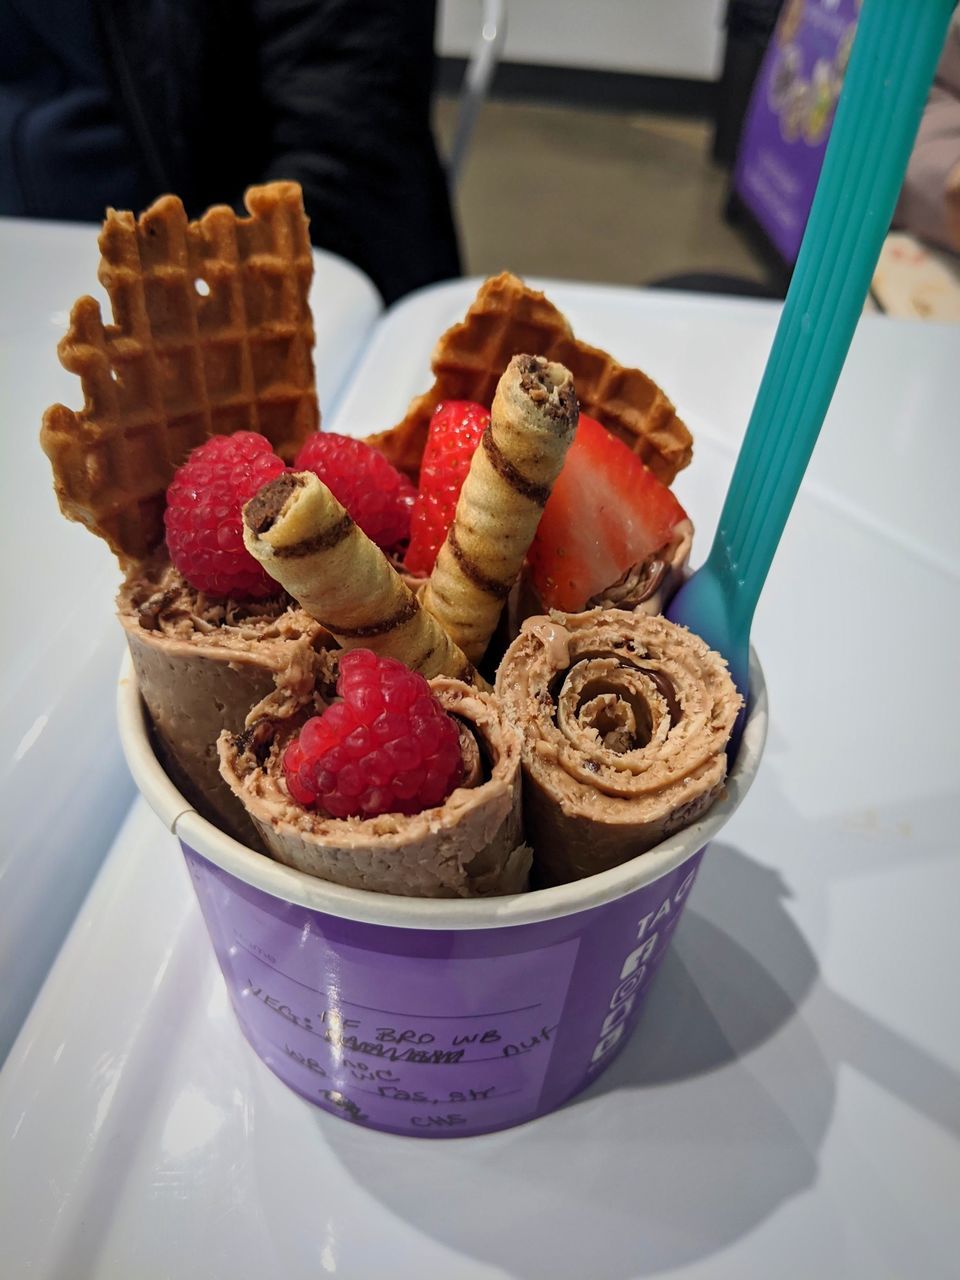 food, food and drink, ice cream, sweet food, sweet, dessert, meal, freshness, sweetness, unhealthy eating, frozen, frozen food, one person, dairy, breakfast, temptation, hand, holding, gelato, waffle, baked, indoors, cone, ice cream cone, berry, fruit, strawberry, fast food, close-up